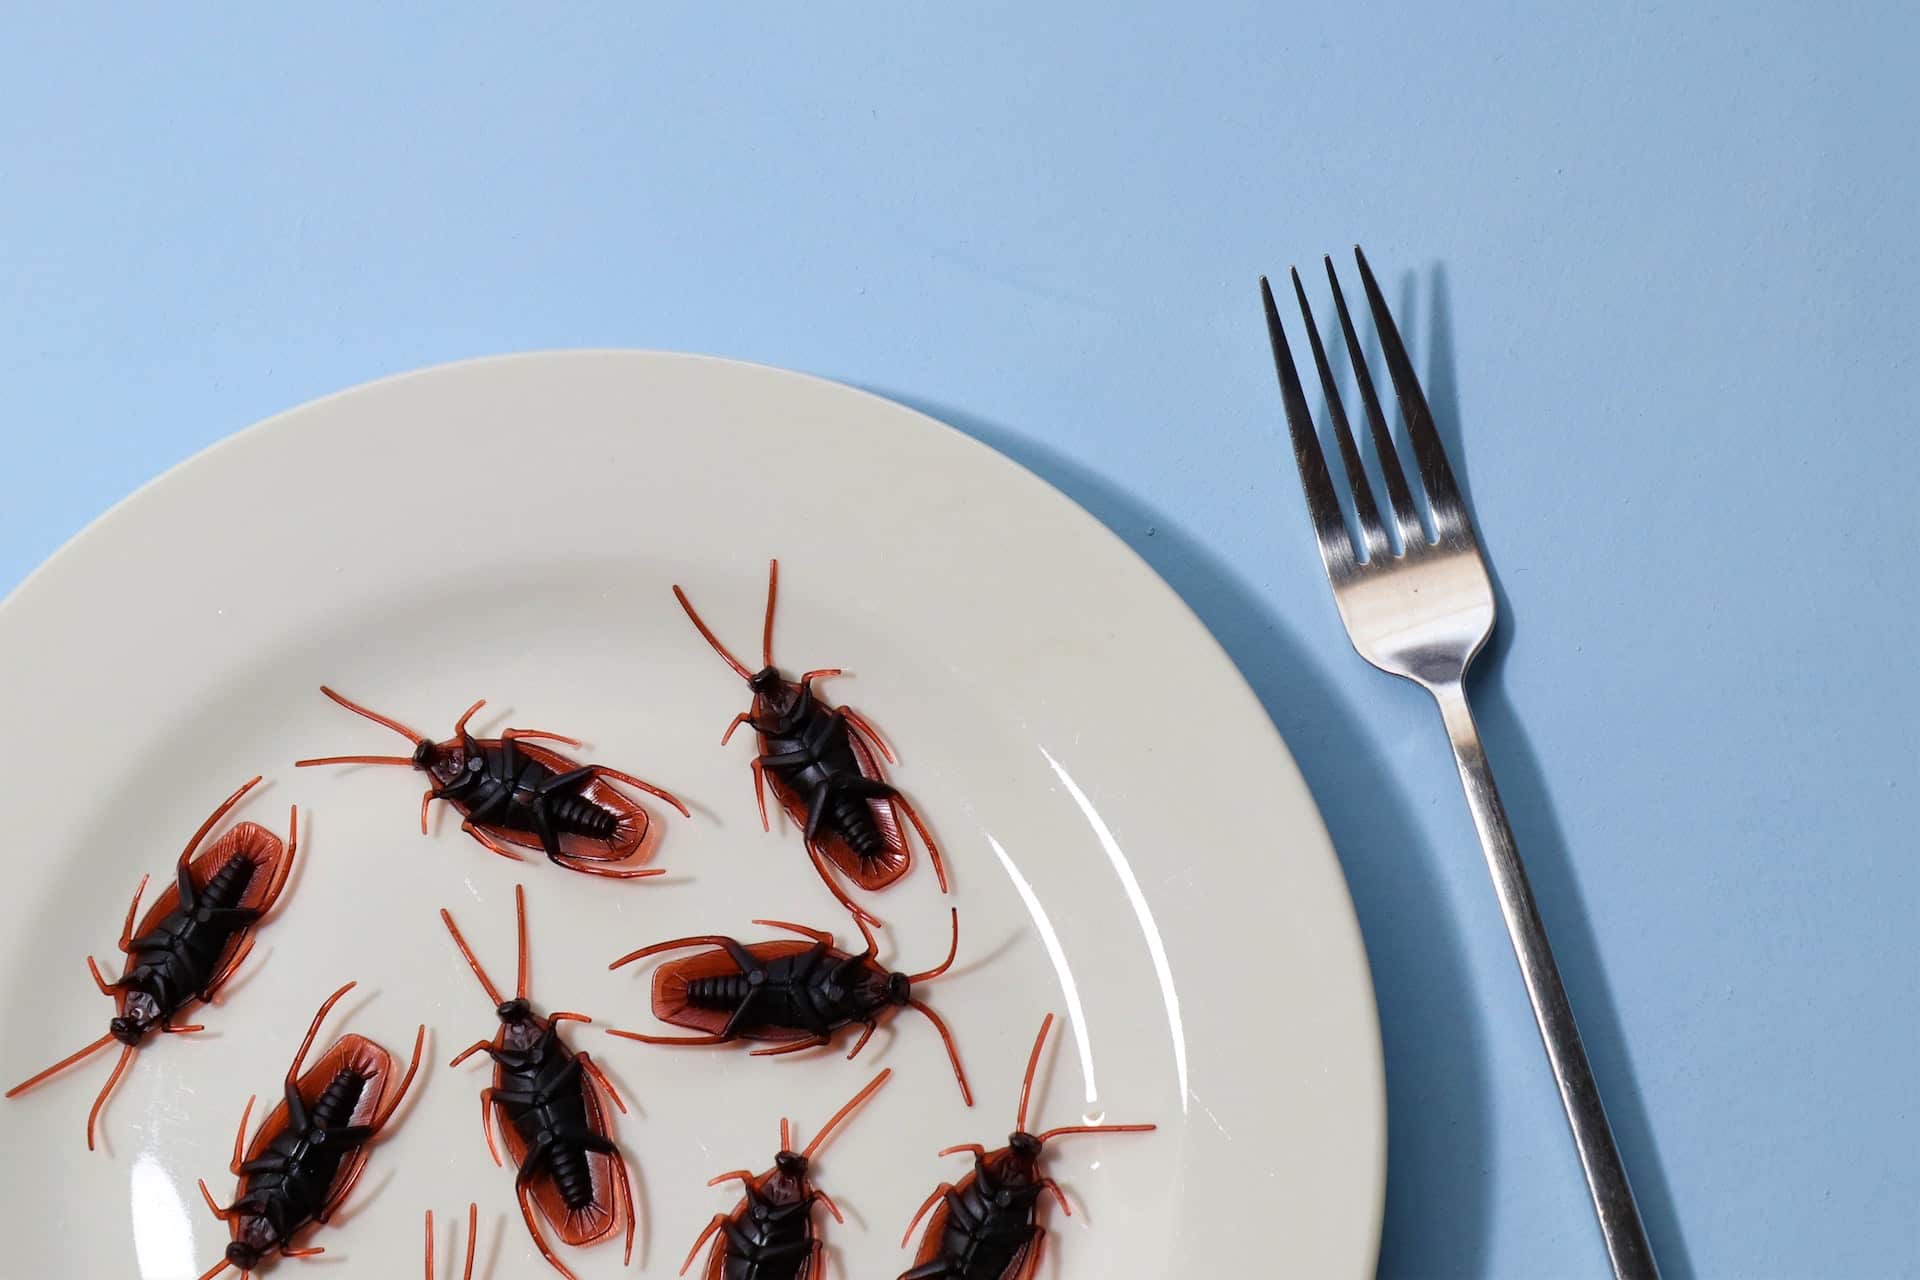 is it safe to eat a cockroach